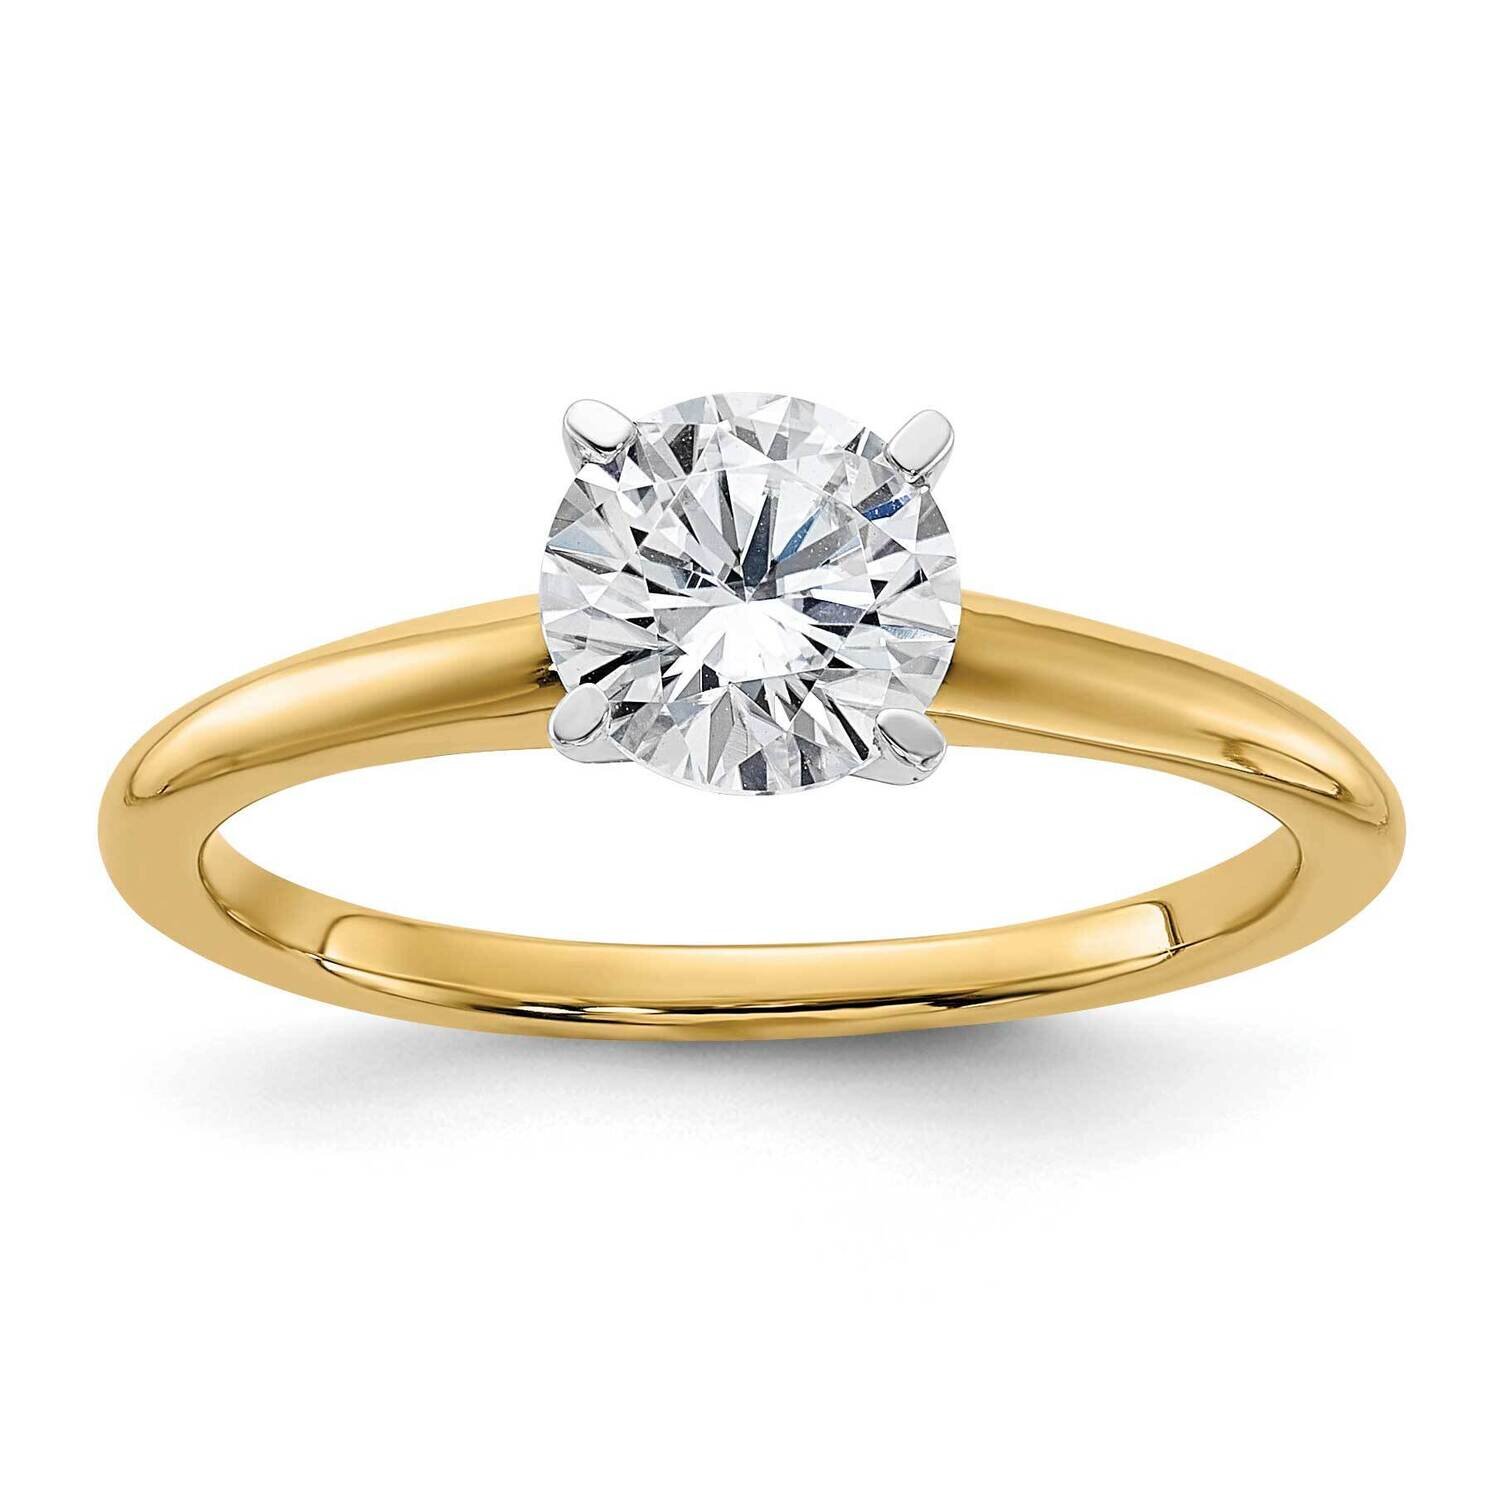 1ct. G H I True Light Round Moissanite Solitaire Ring 14k Two Tone Gold RM5965R-100-6MT